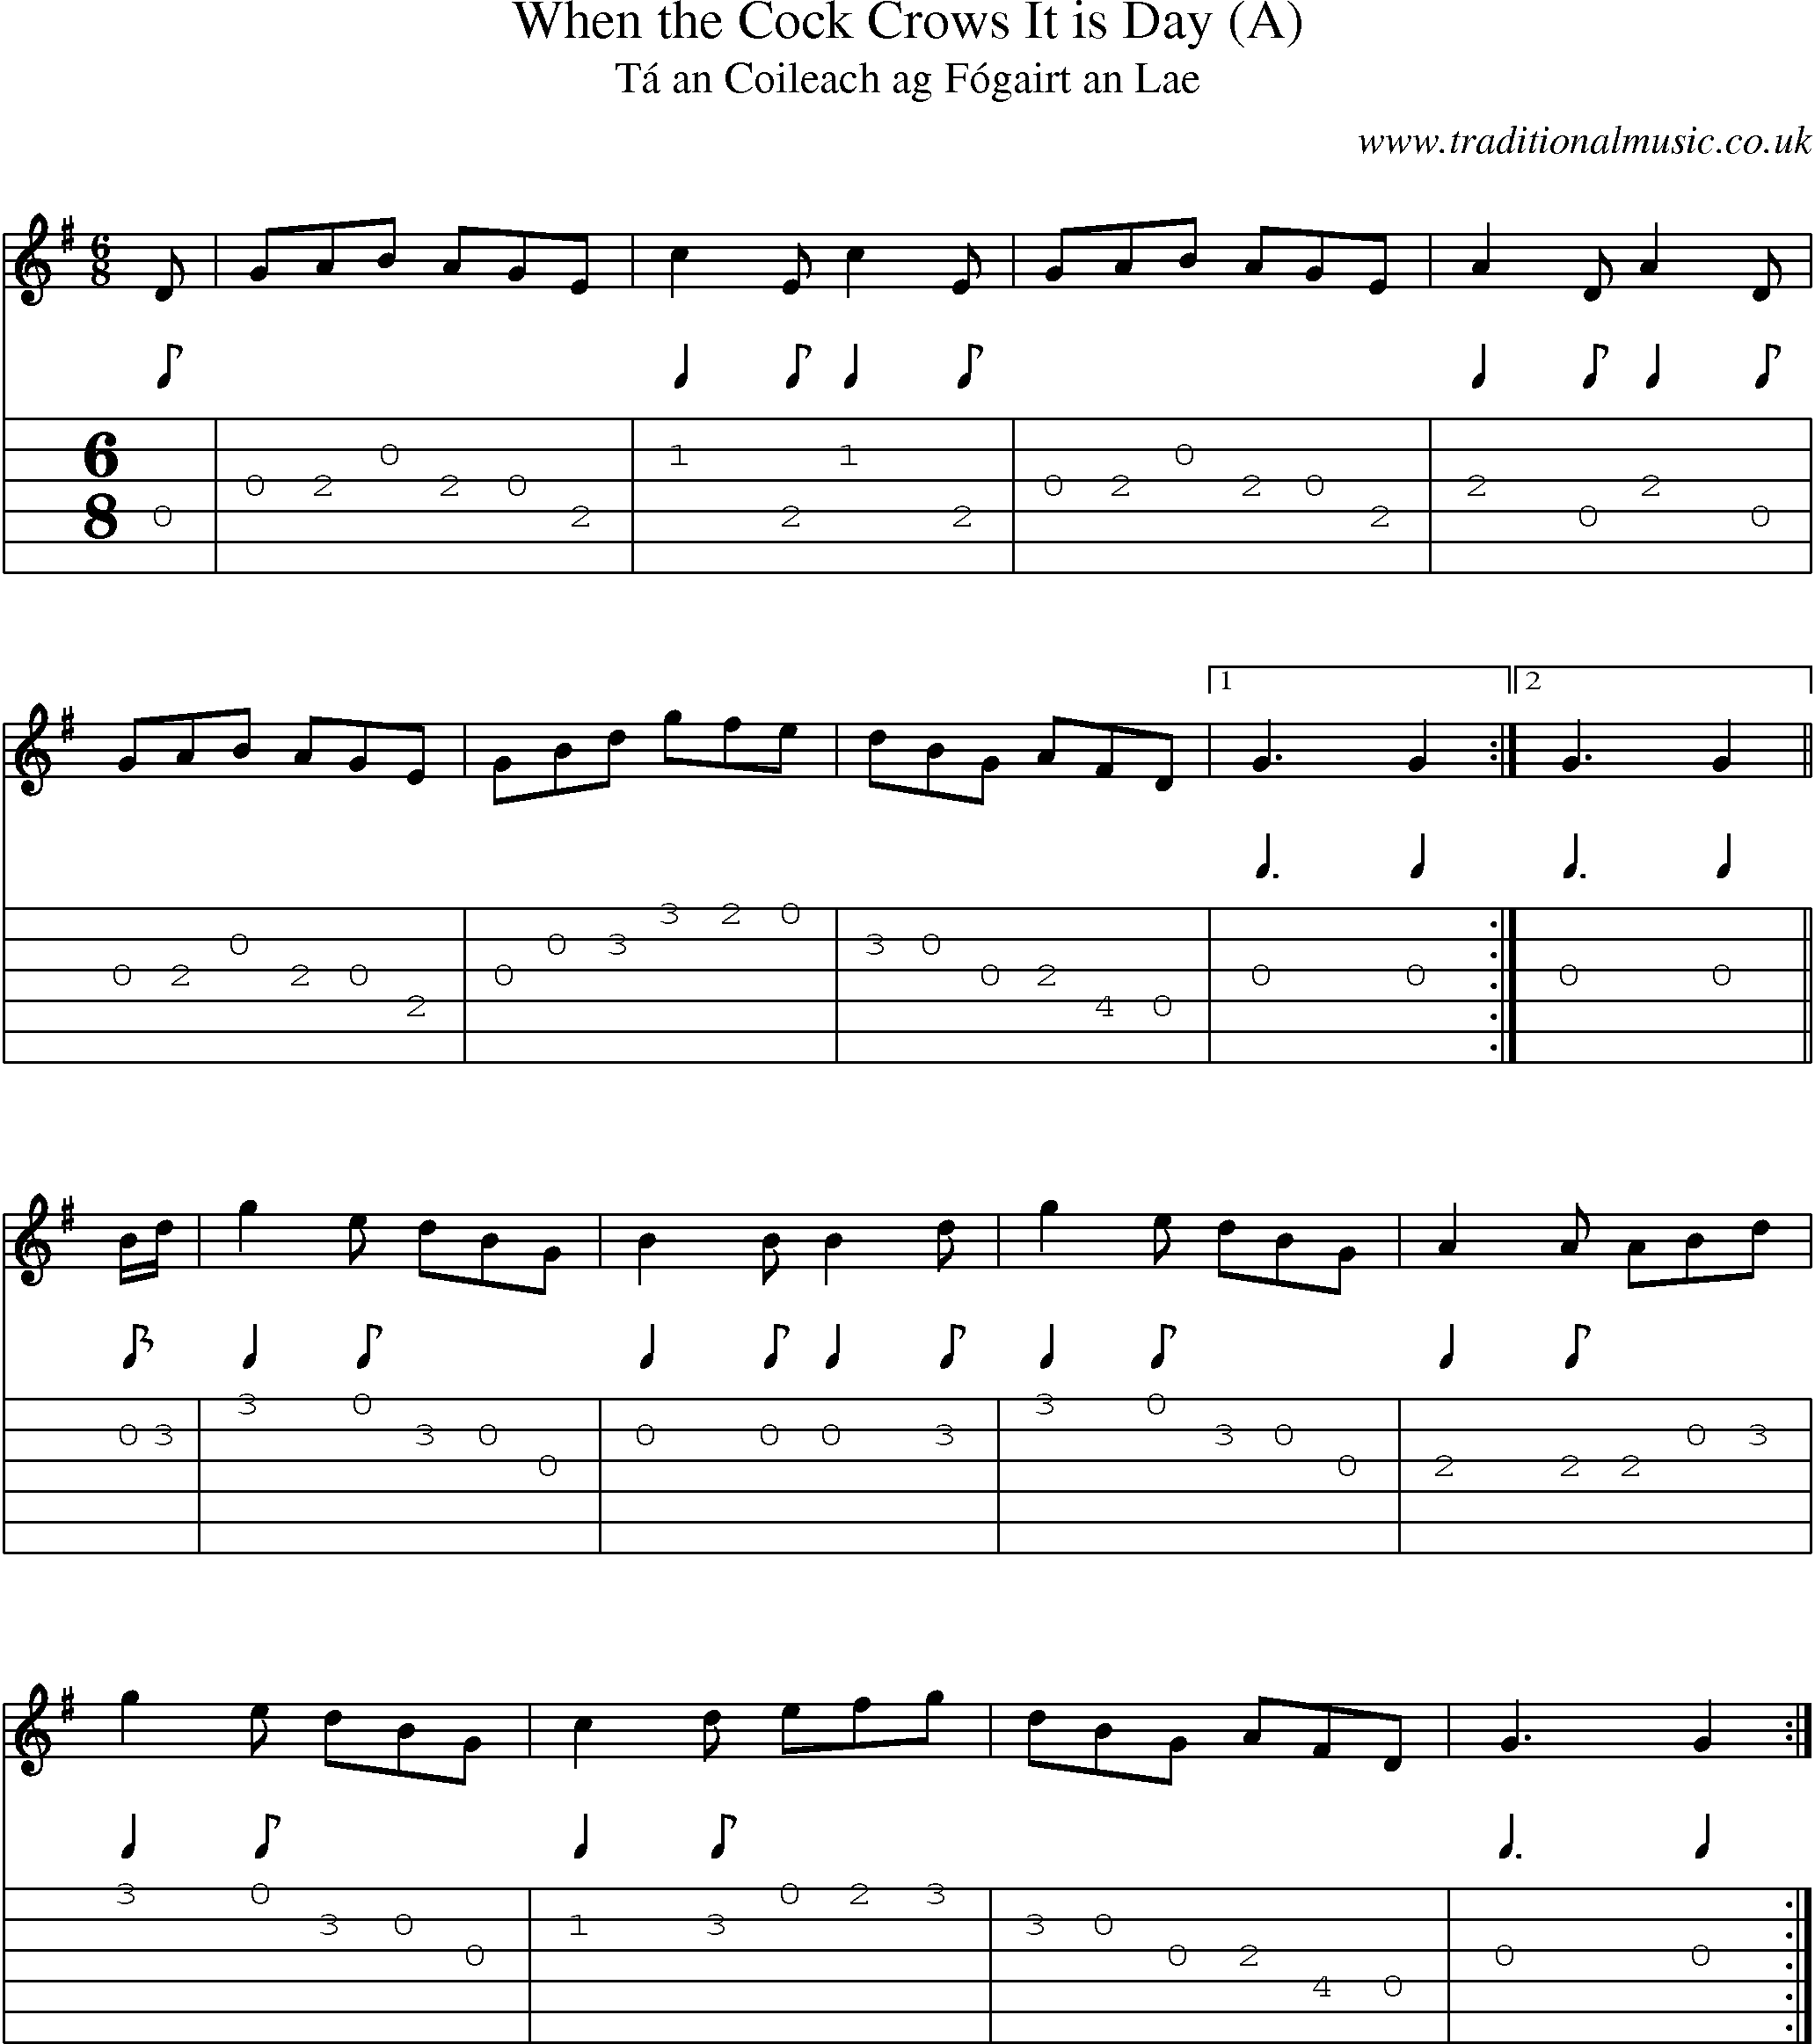 Music Score and Guitar Tabs for When Cock Crows It Is Day (a)